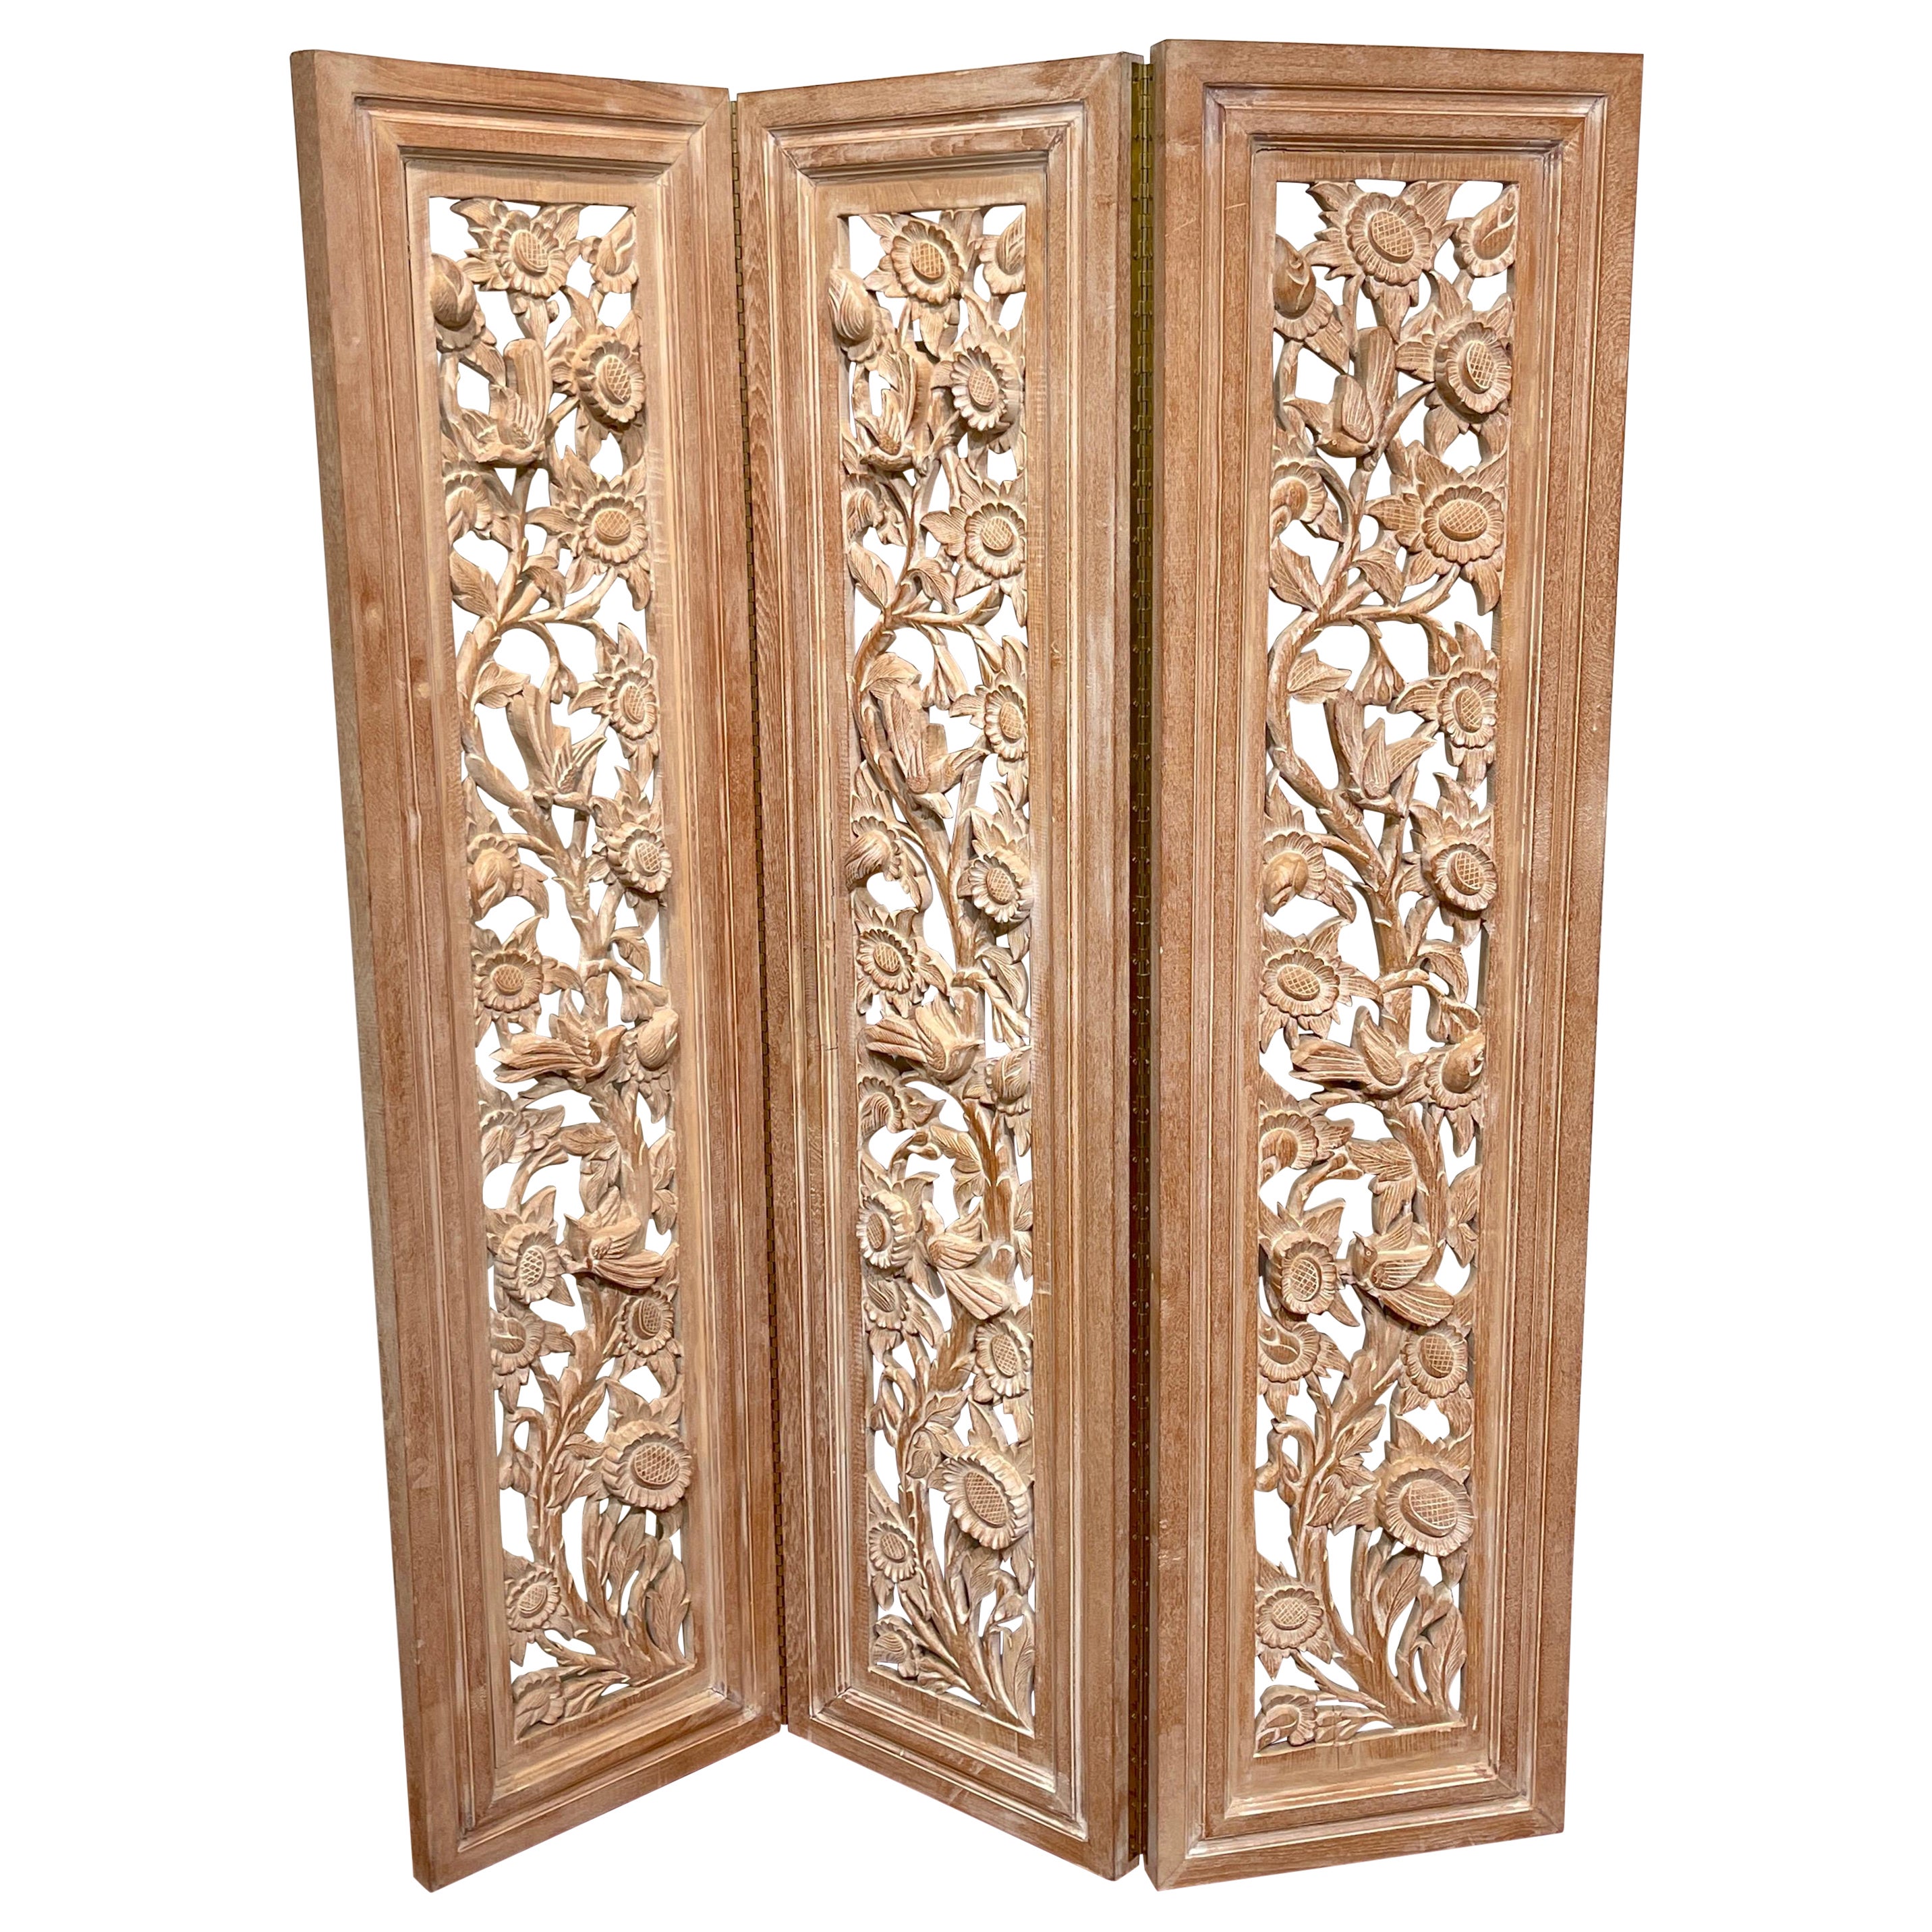 Three-Panel Carved Bleached Hardwood Bird Floral Screen, Style of James Mont 